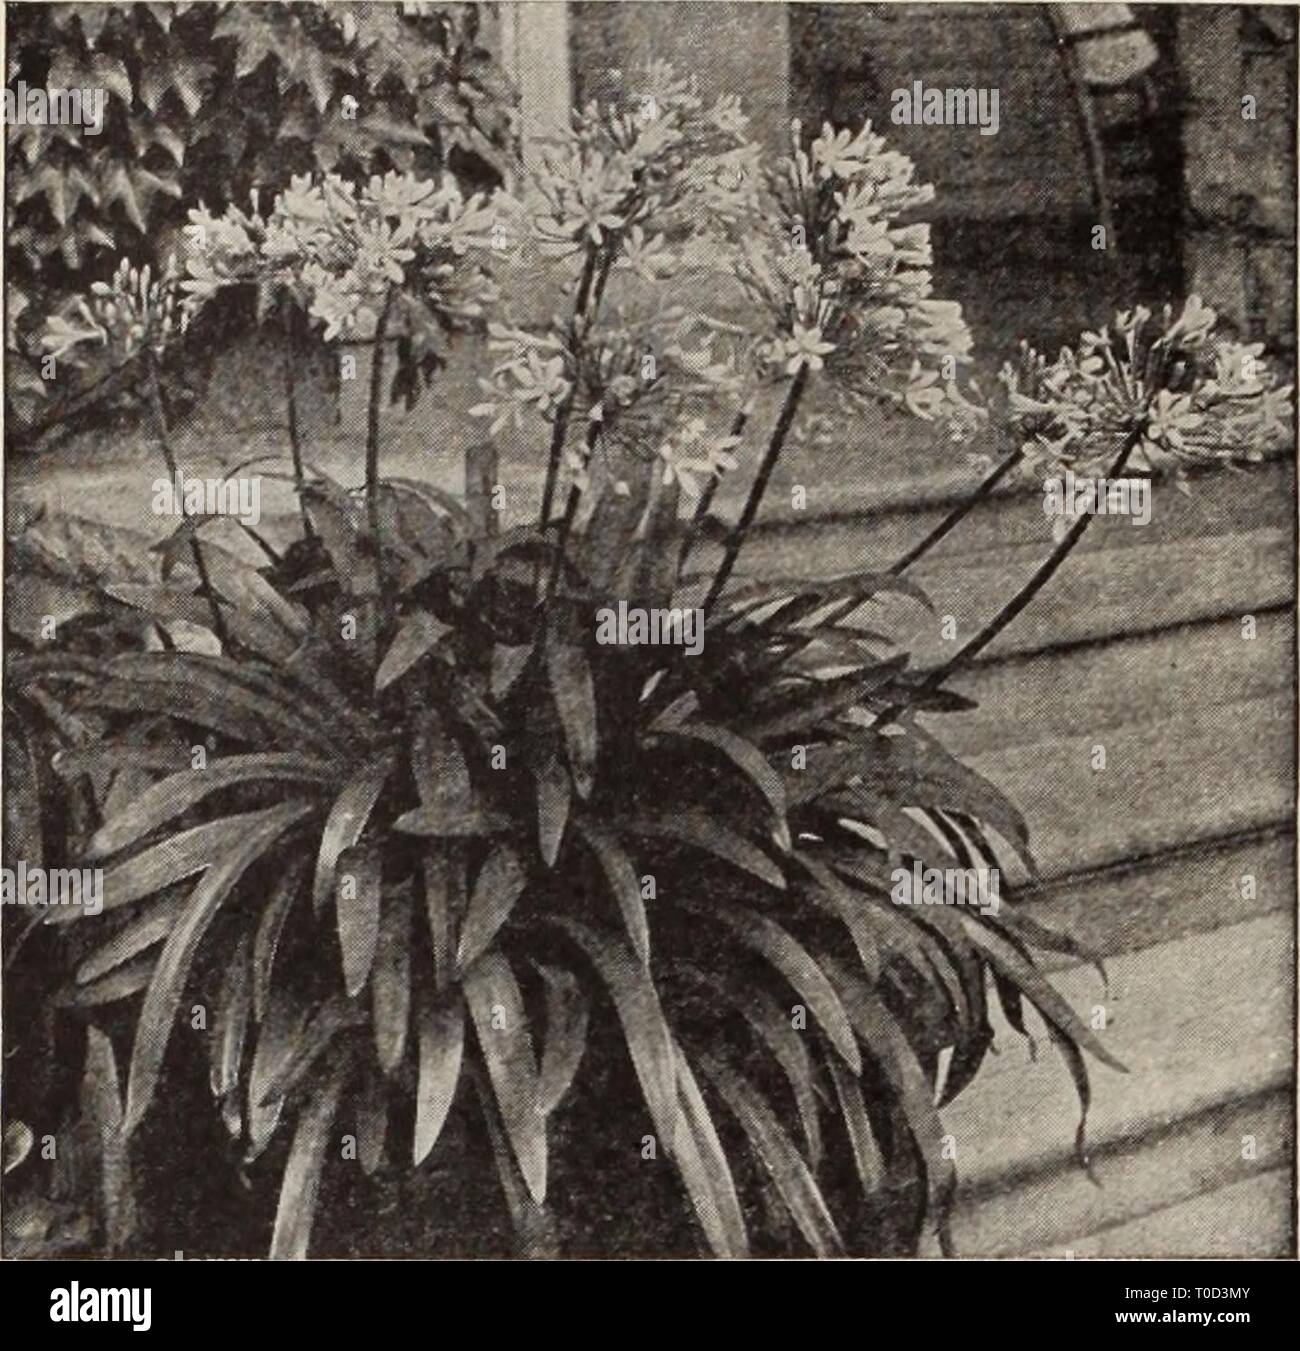 Dreer's garden book  Henry Dreer's garden book / Henry A. Dreer. dreersgardenbook1931dree Year:   156 H^^^^^^^^^^^^^^^Mj PLANTS FOR THE GARDEN AND GREENHOUSE    Agapanthus Umbellatus Agapanthus Umbellatus (Blue Lily of the Nile). A splendid ornamental plant, bearing clusters of bright, blue flowers on 3 feet long flower stalks lasting a long time in bloom. A most desirable plant for outdoor decoration, planted in large pots or tubs on the lawn or piazza. Strong flowering plants from 5-inch pots, $1.00; 8-inch pots, $3.00; large 12-inch tubs, $6.00 each. Agave (Century Plant) An old time favori Stock Photo